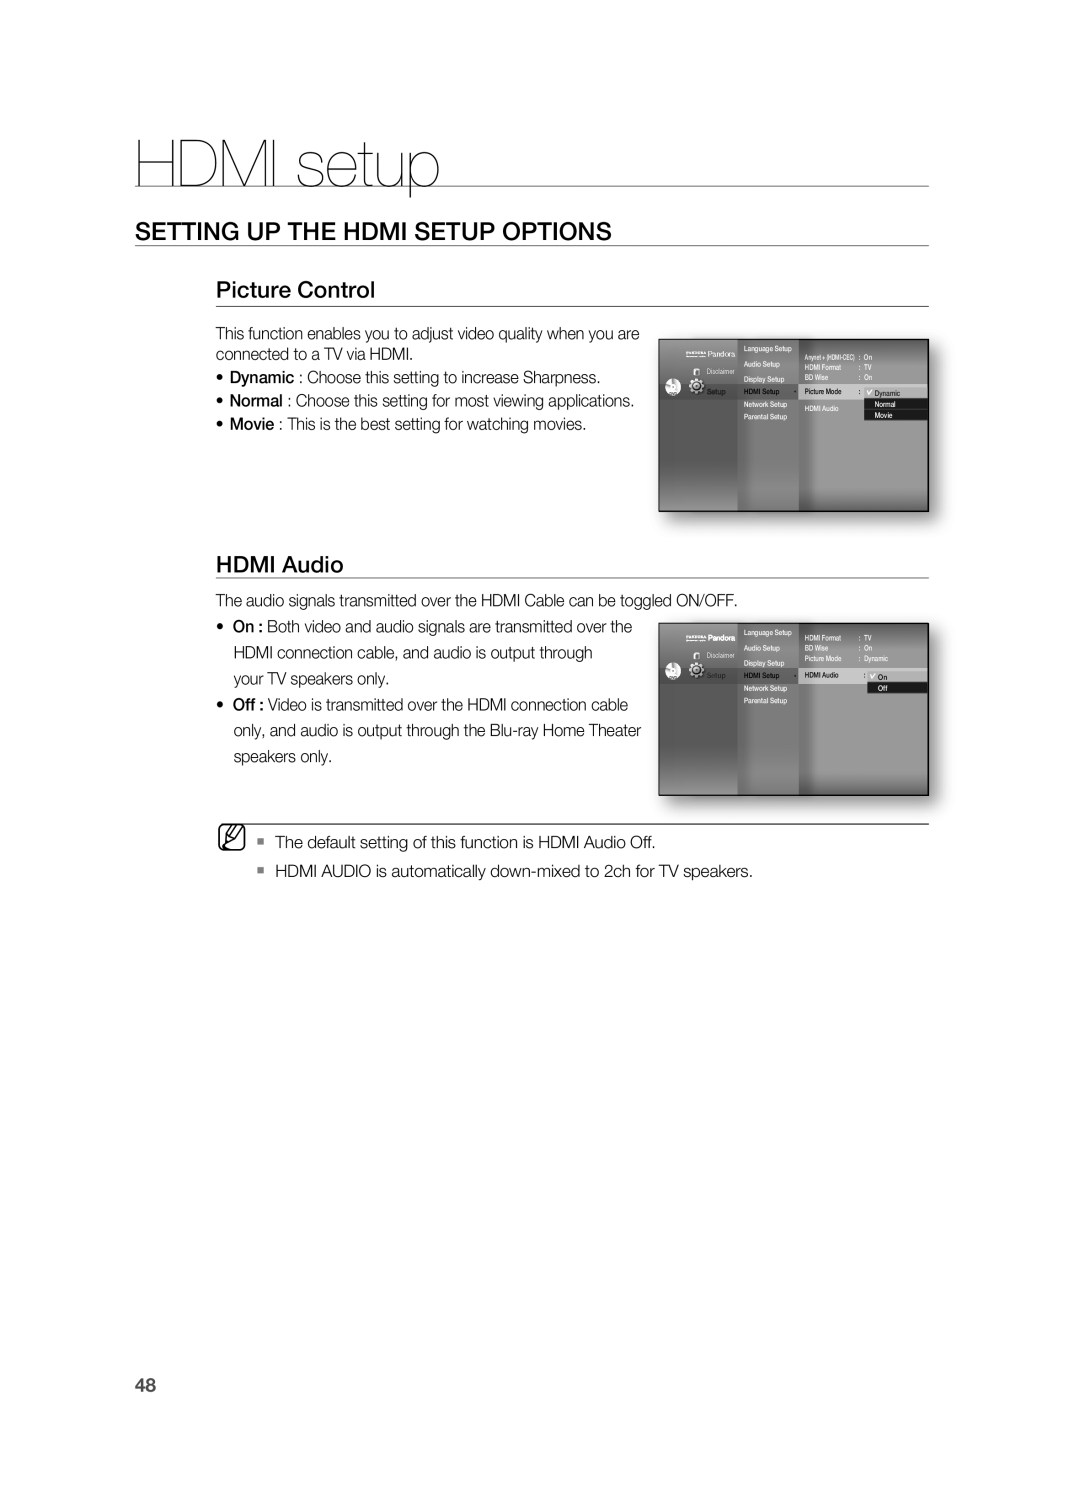 Samsung AH68-02178Z Picture Control, HDMI Audio, HDMI setup, Setting Up The Hdmi Setup Options, connected to a TV via HDMI 